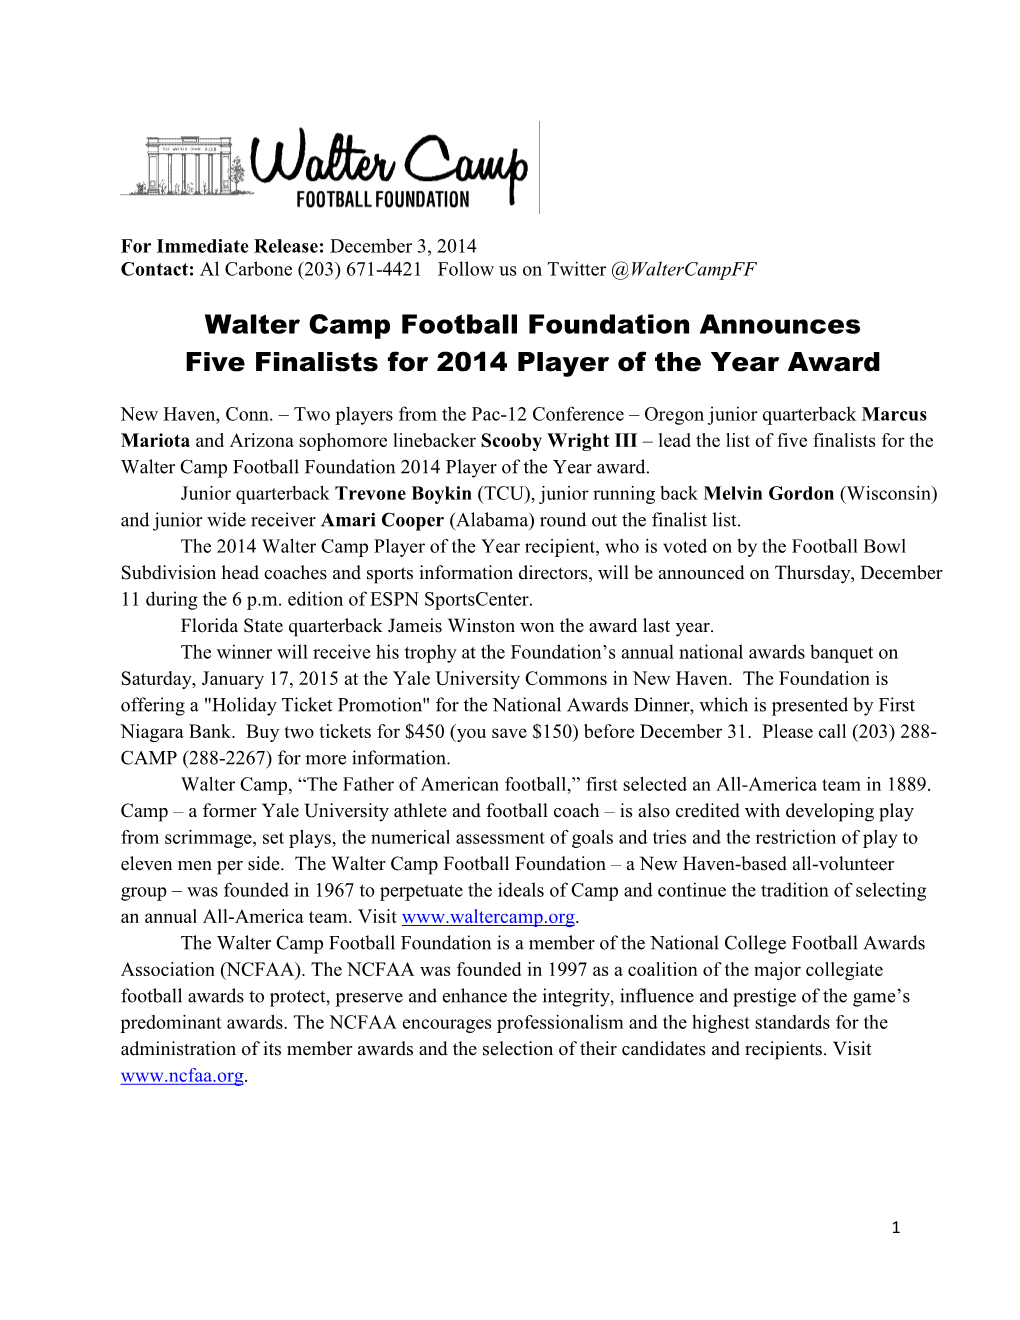 Walter Camp Football Foundation Announces Five Finalists for 2014 Player of the Year Award